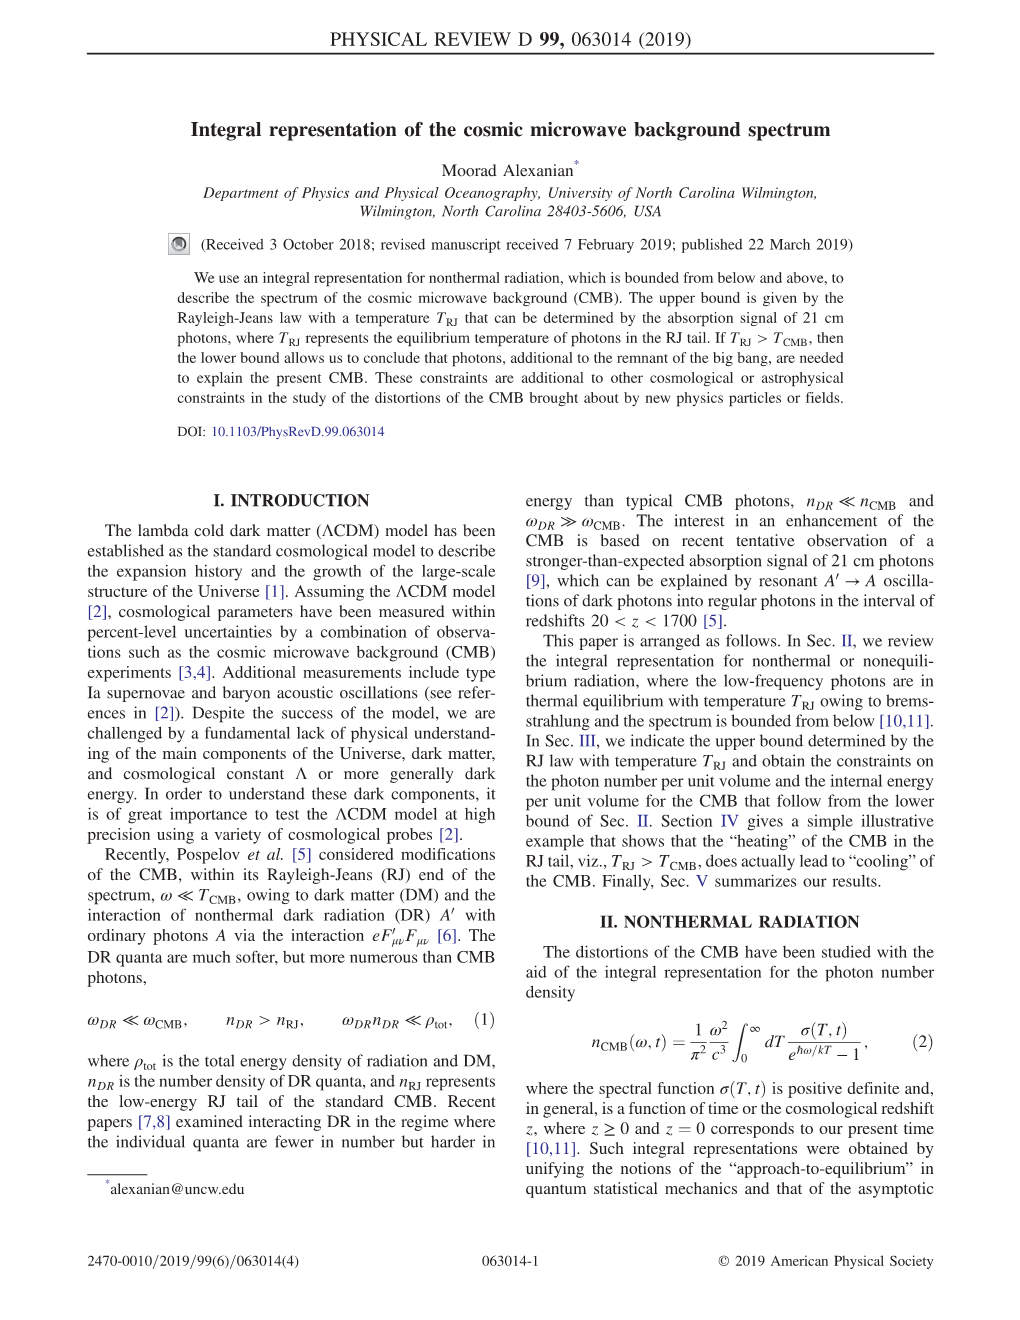 Integral Representation of the Cosmic Microwave Background Spectrum